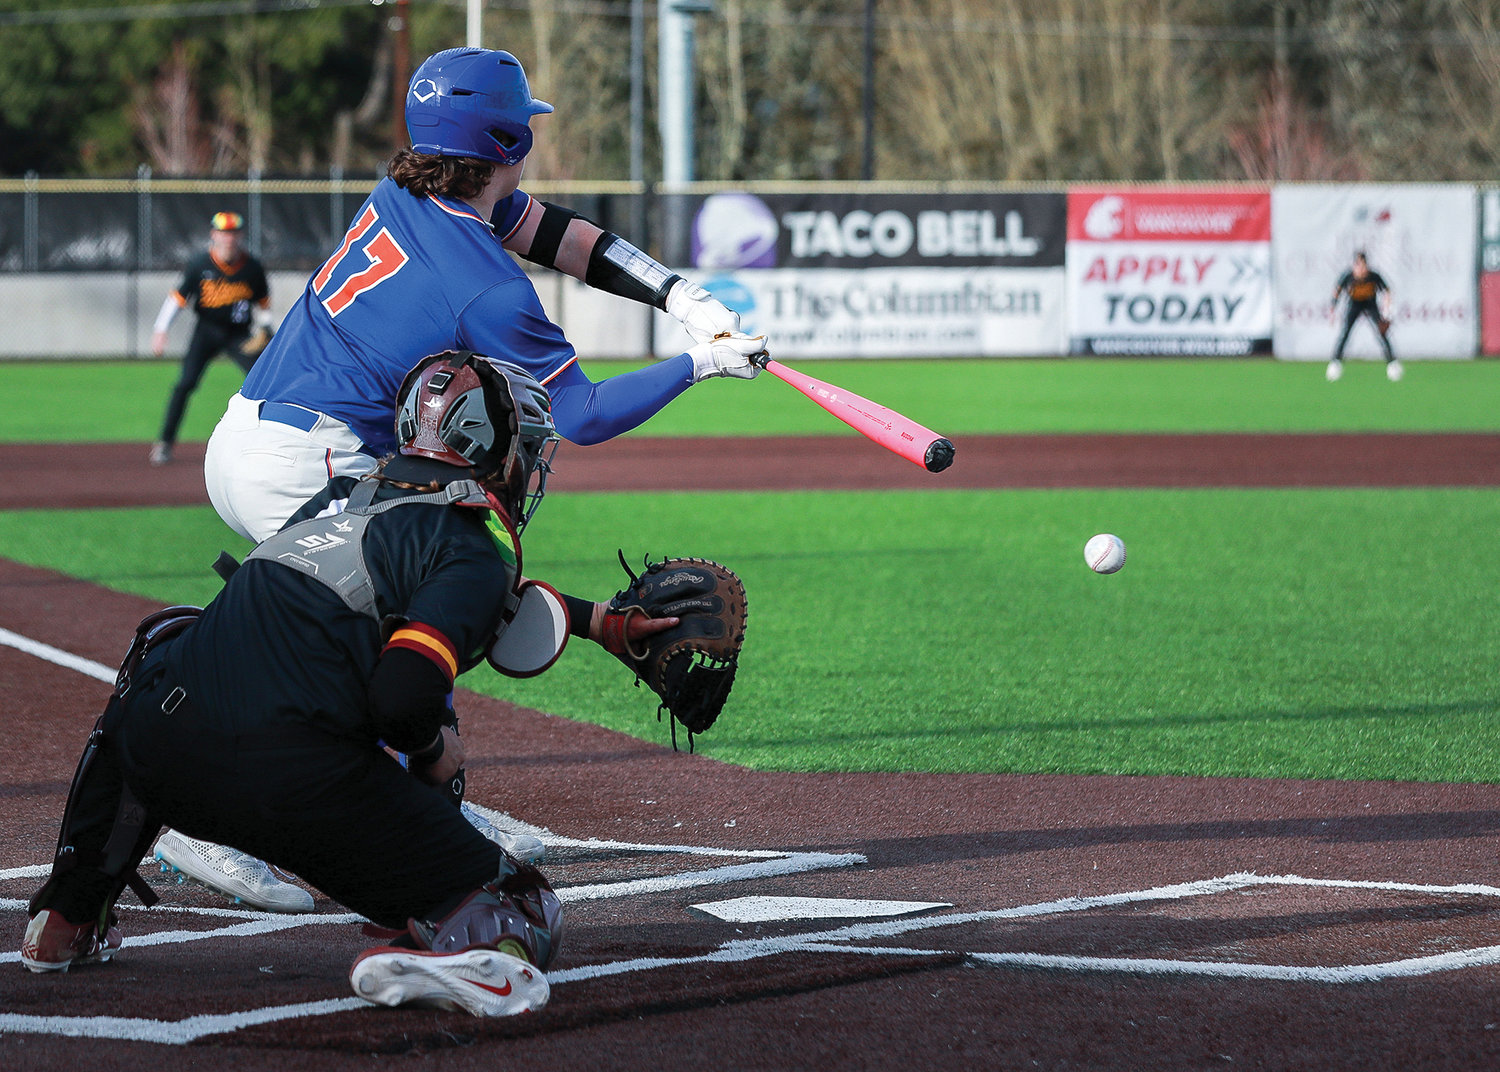 Ridgefield's Liam Ostrom swings and misses for strike three on a pitch by Prairie's Brady Trombello on Tuesday, March 14.